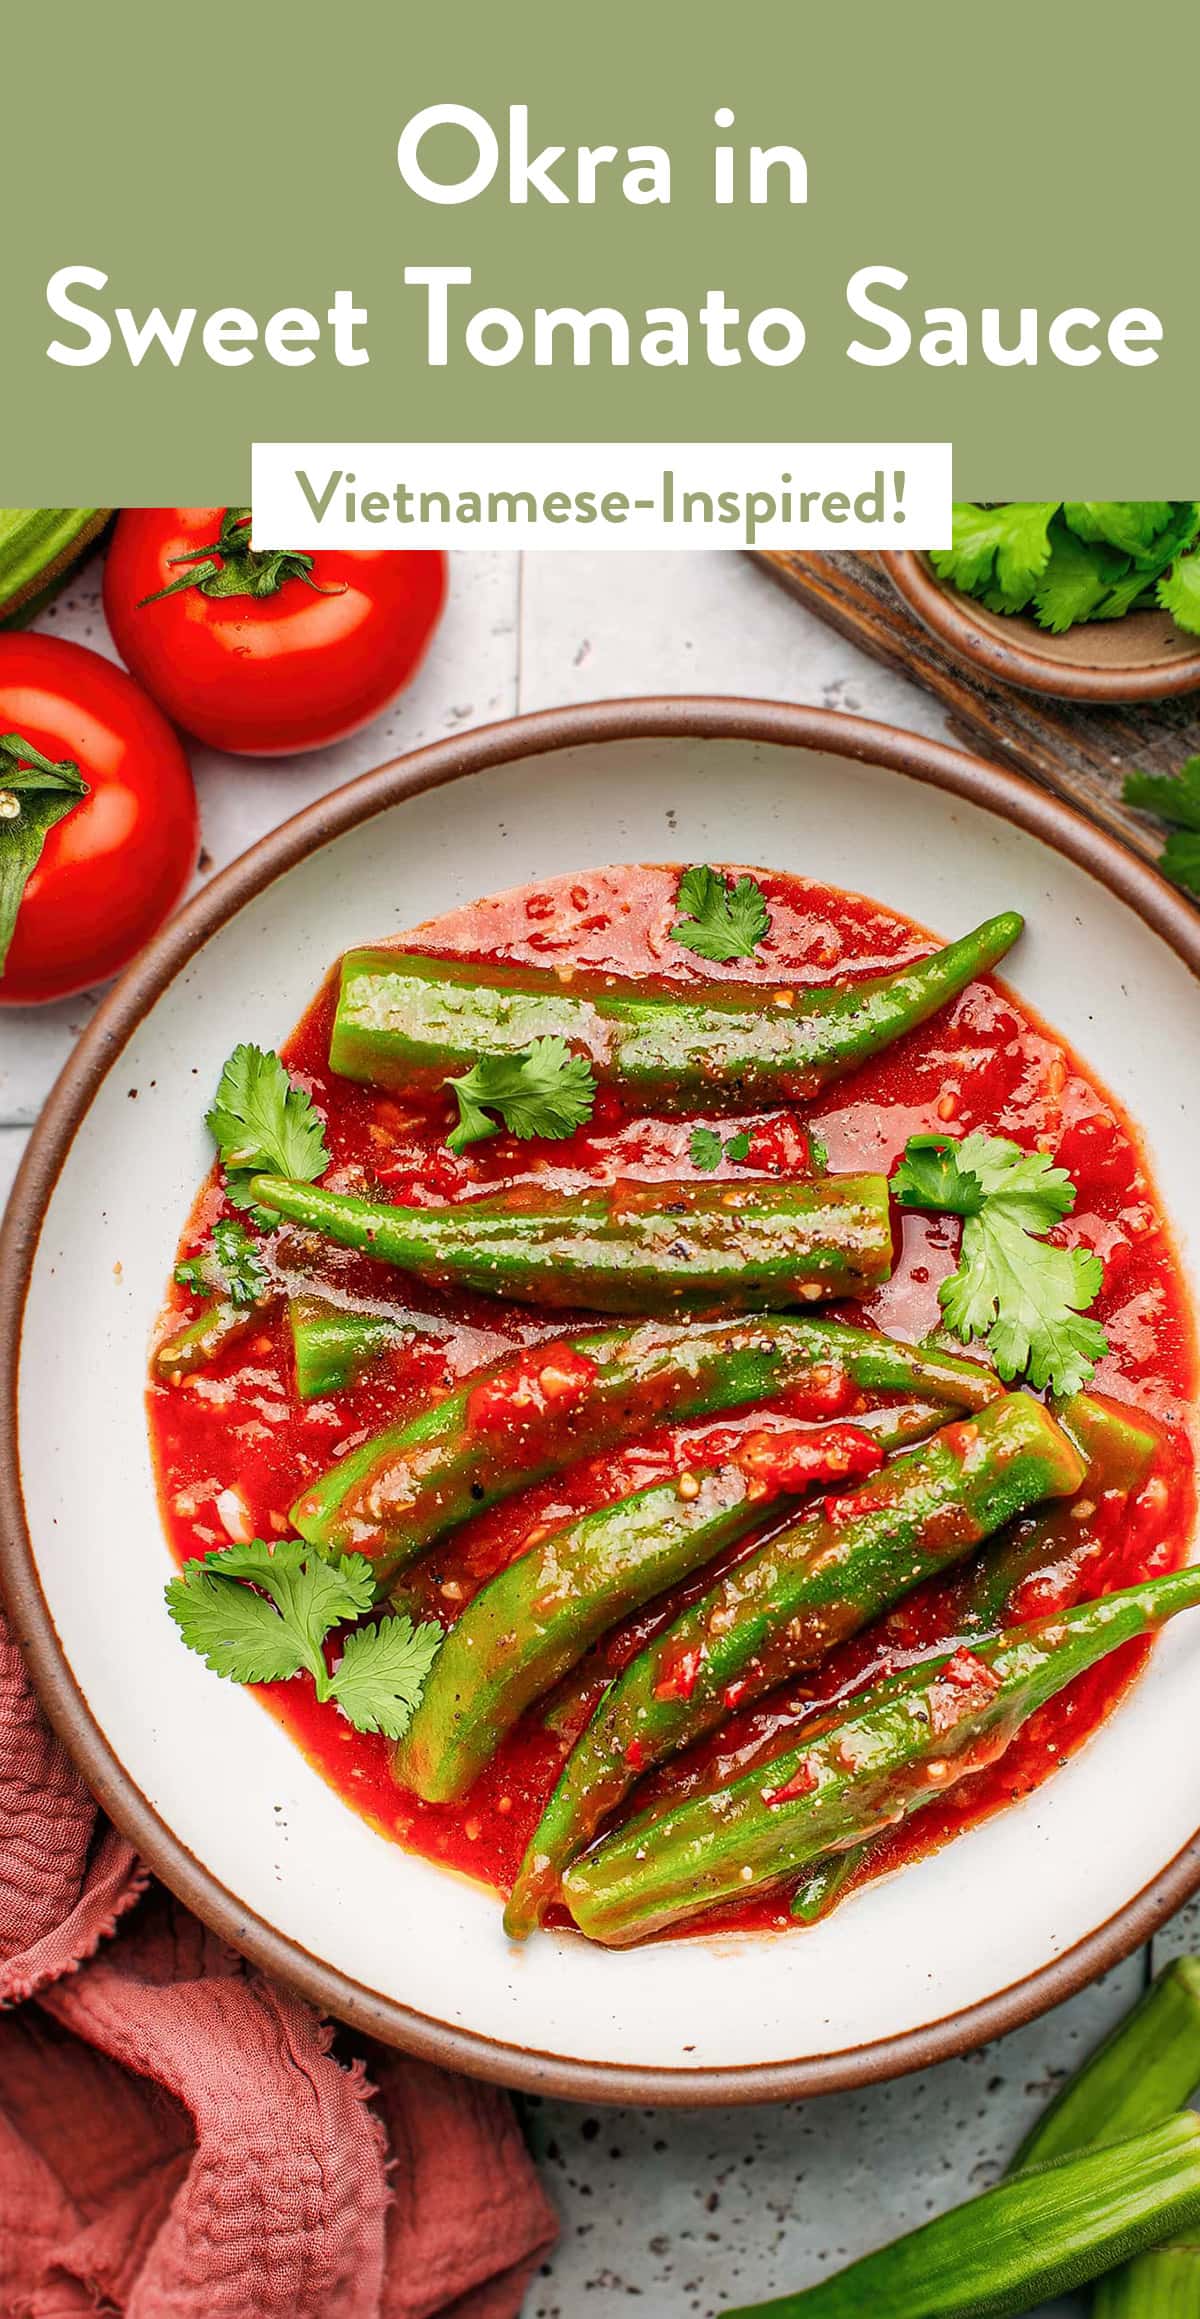 This Vietnamese-inspired dish features tender okra pods simmered in a delicious sweet and salty tomato sauce! This healthy and comforting side dish is packed with flavor and pairs perfectly with steamed white rice, quinoa, or couscous. #okra